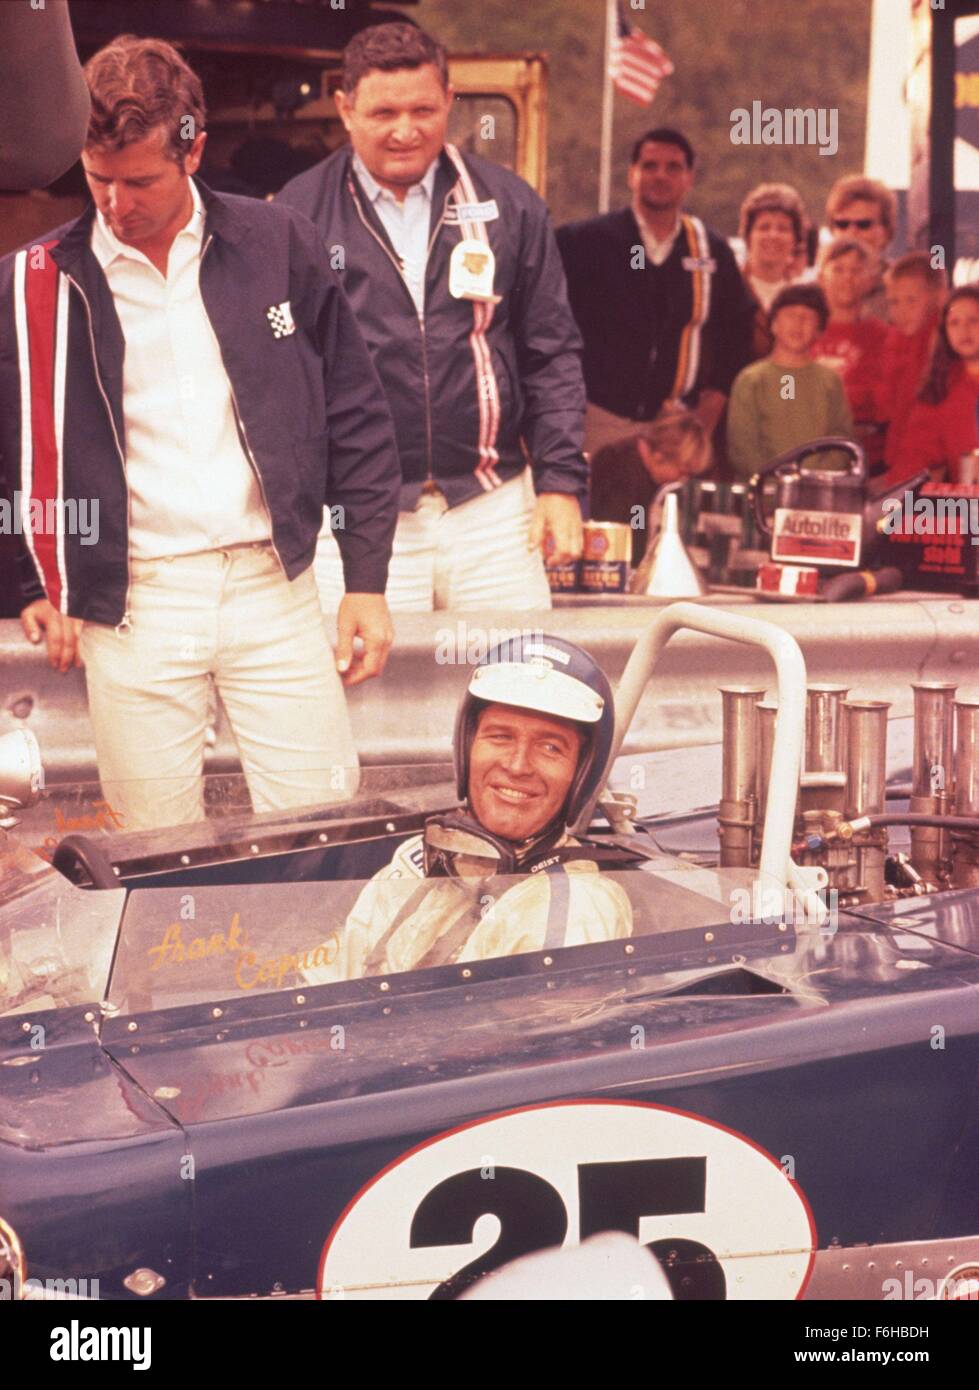 1969, Film Title: WINNING, Director: JAMES GOLDSTONE, Pictured: JAMES GOLDSTONE, PAUL NEWMAN, RACING CAR. (Credit Image: SNAP) Stock Photo